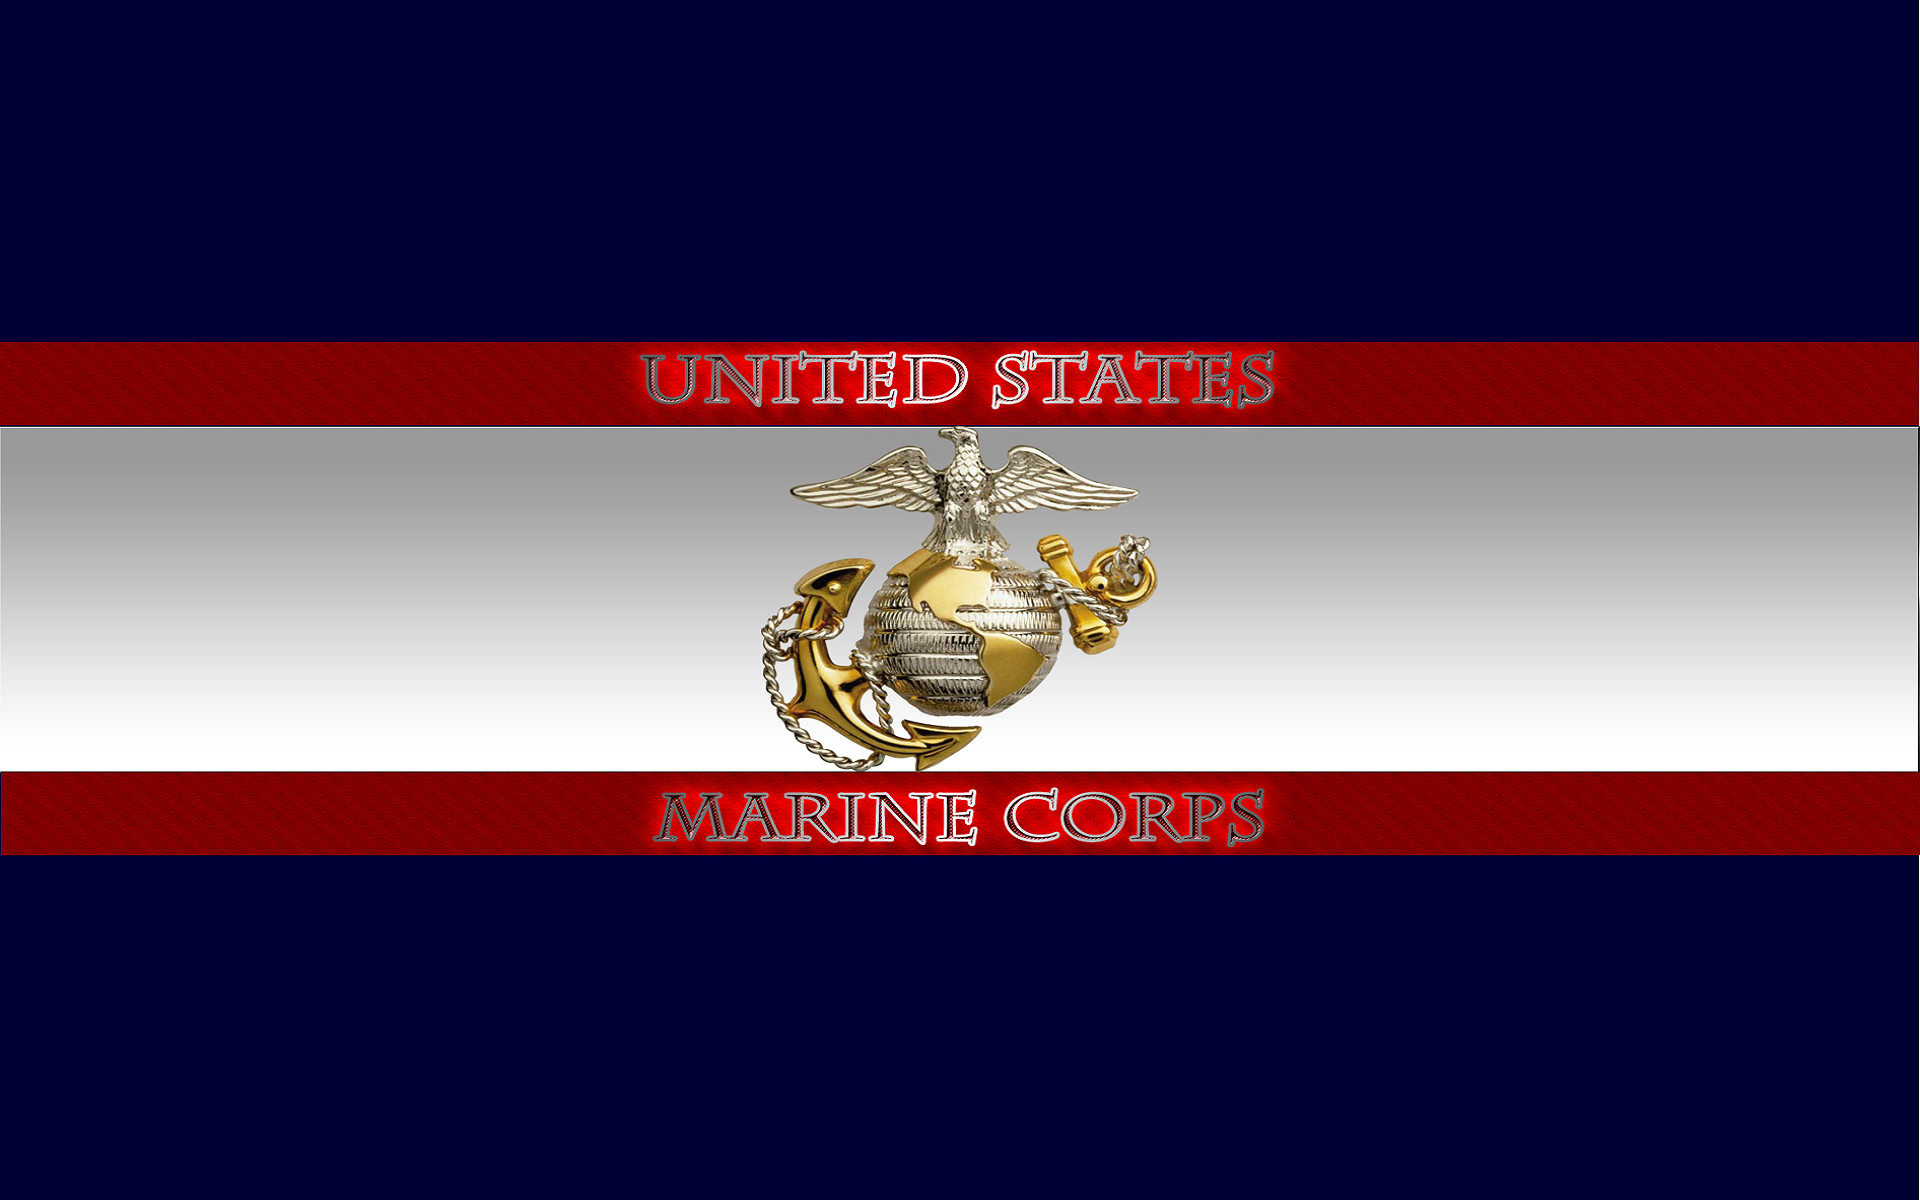 Marine Corps Wallpaper and Screensavers (53+ images)